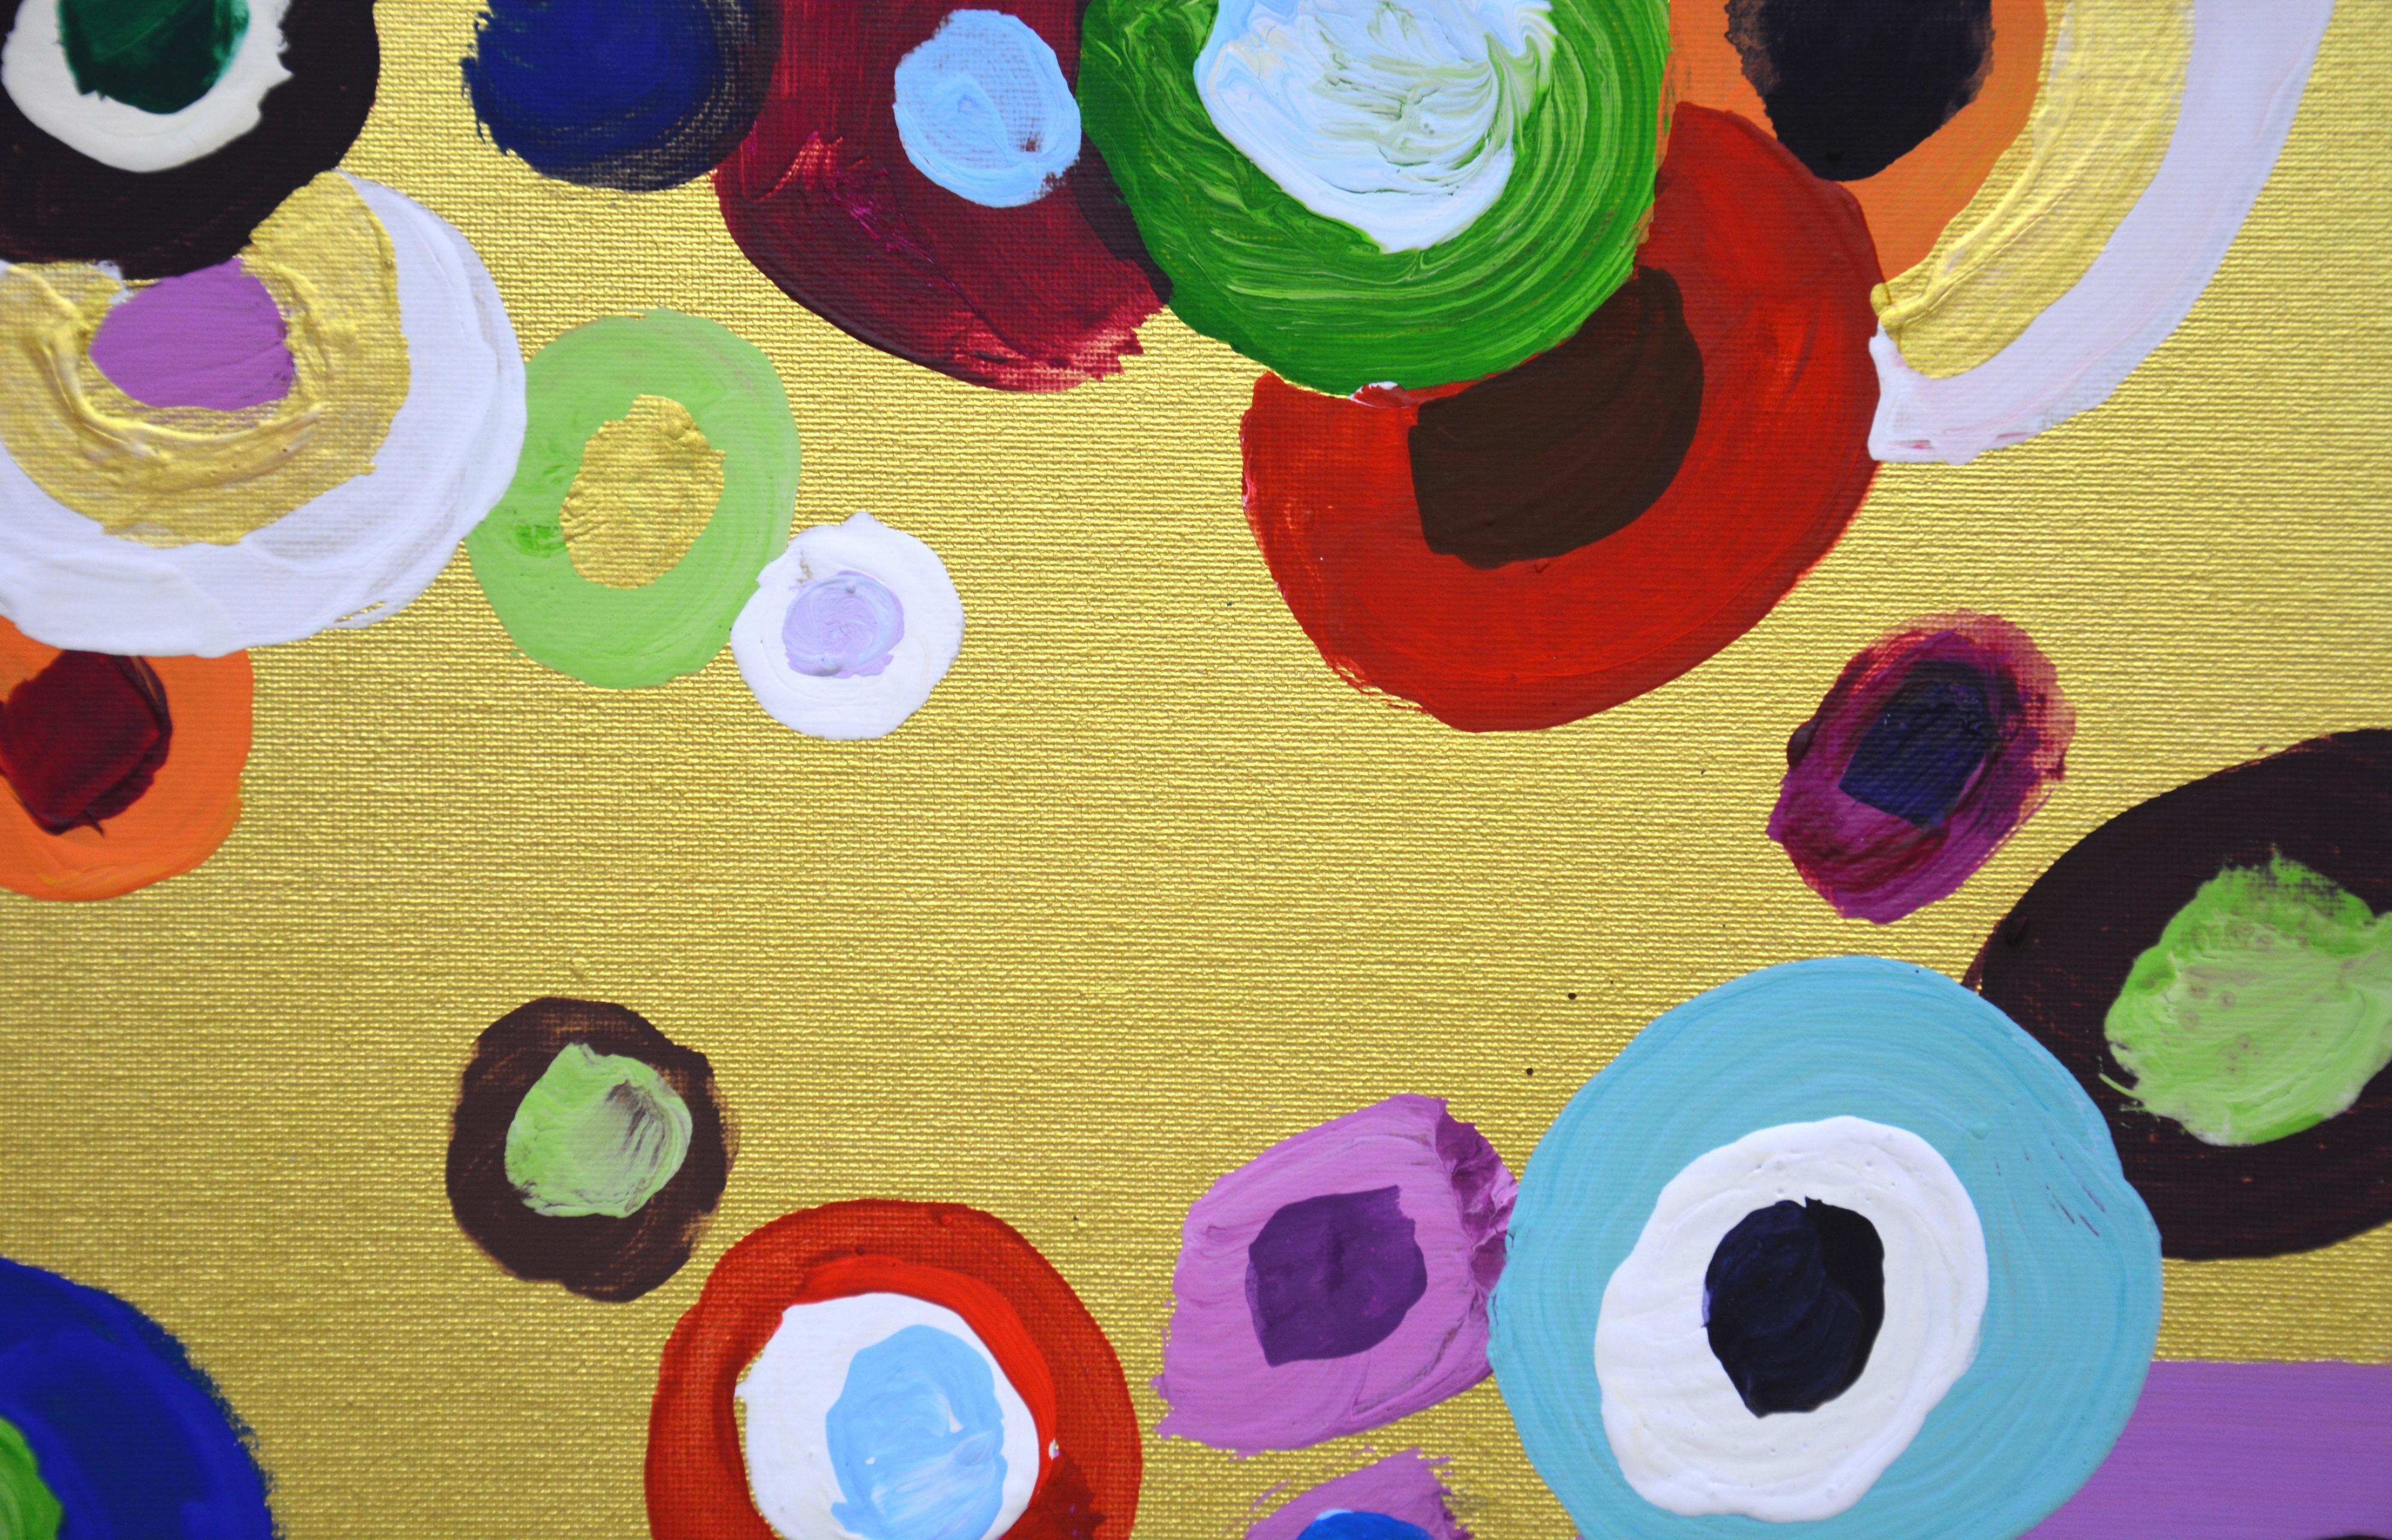 
Circles on gold 2. Energetic abstract painting with acrylics on canvas. Canvas on cardboard. The product has a modern aesthetic design. The work is filled with energy, the movement of round shapes, bright colors on a golden background. Painting is